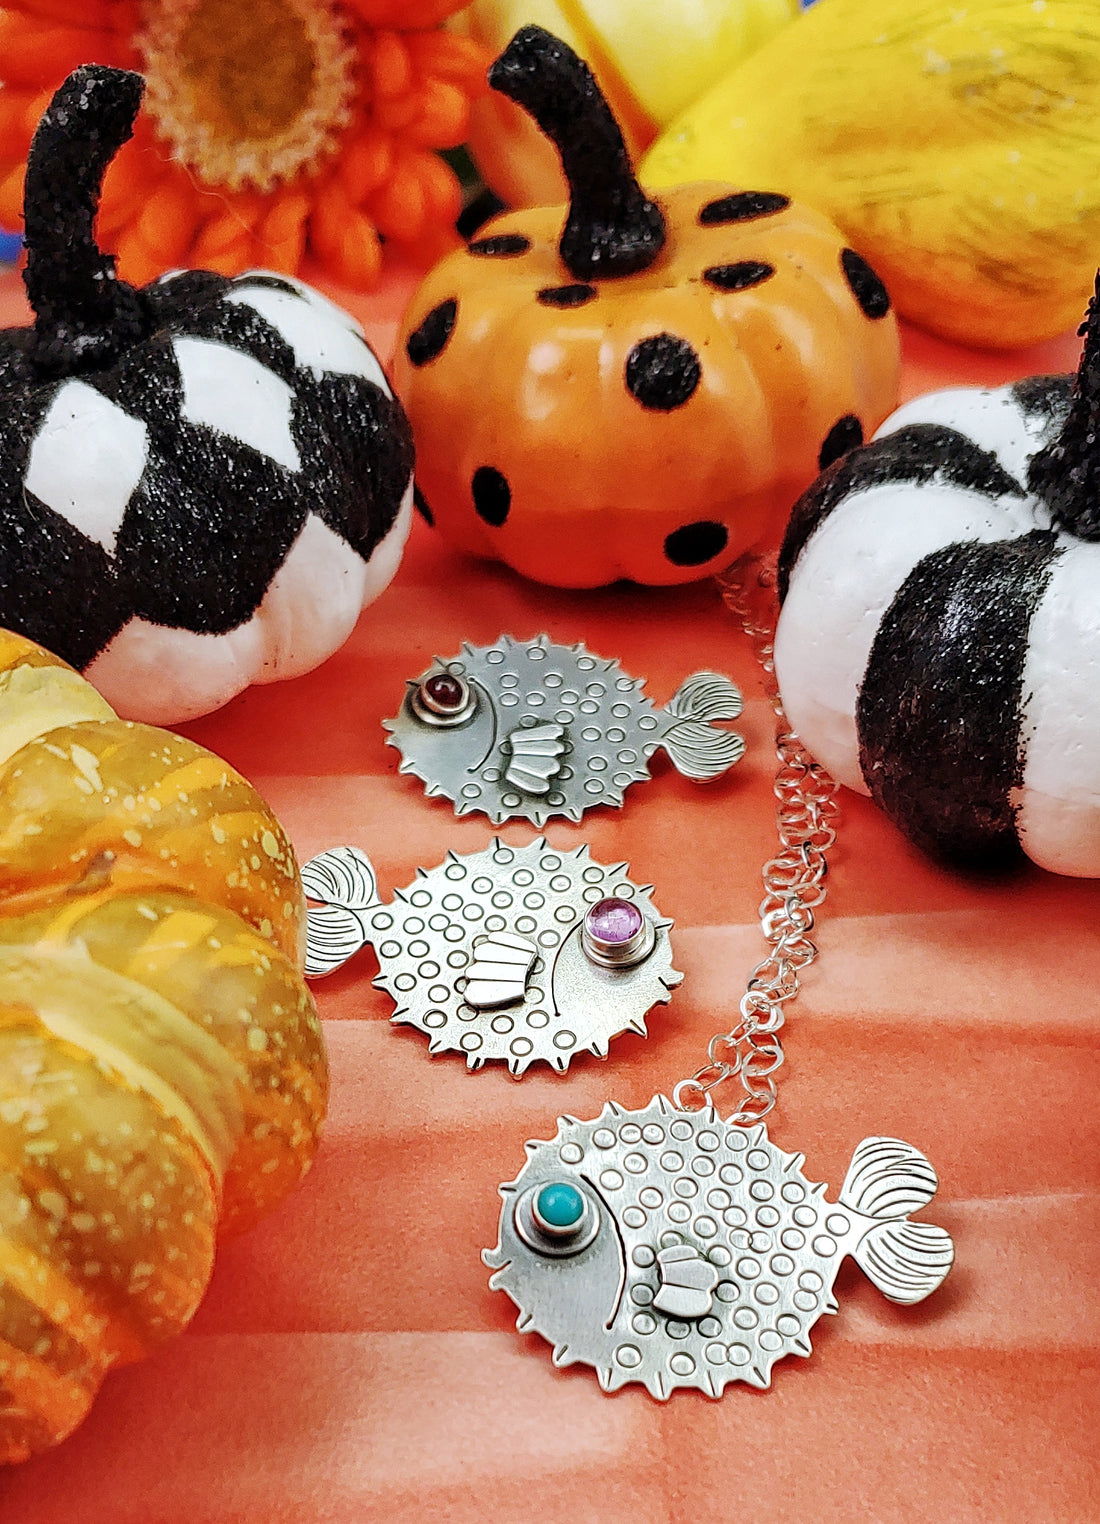 Puffer fish necklaces and pumpkins